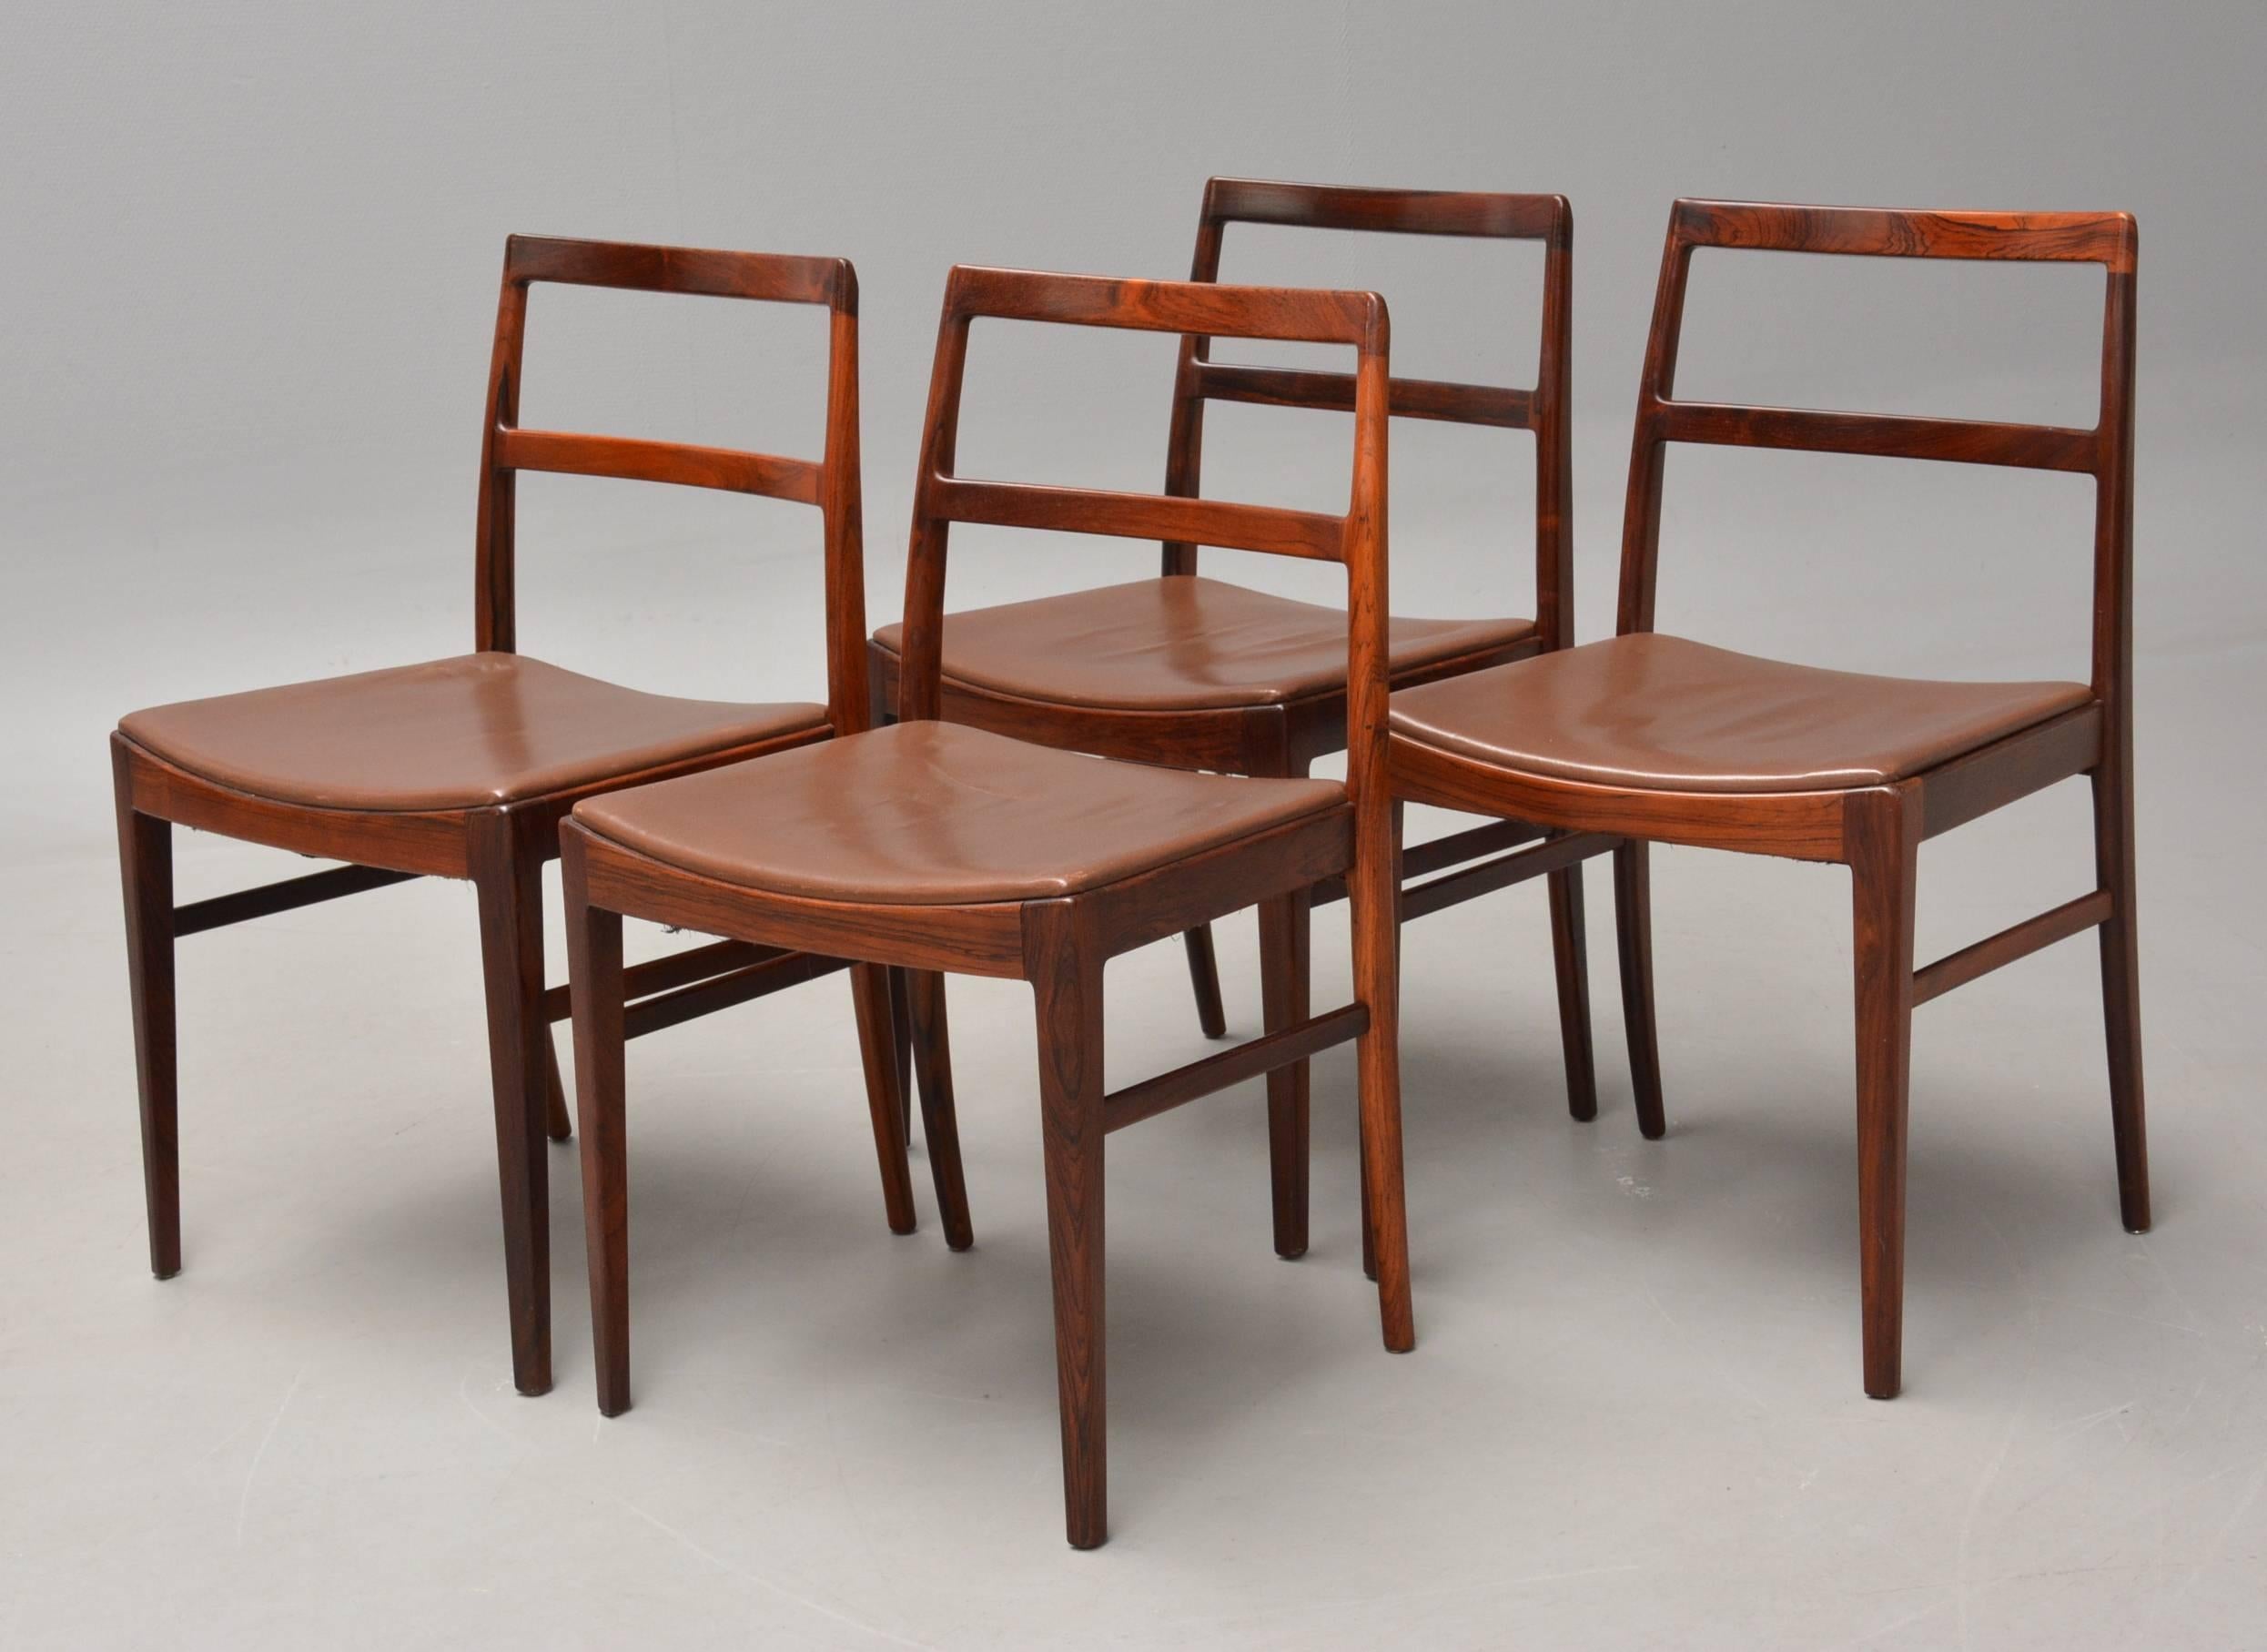 Set of four model 430 dining chairs designed by Arne Vodder for Sibast Møbelfabrik. 

The chairs are made from rosewood and are, with their elegant design and joints that are hardly visible but float into each other, evidence of the superb design